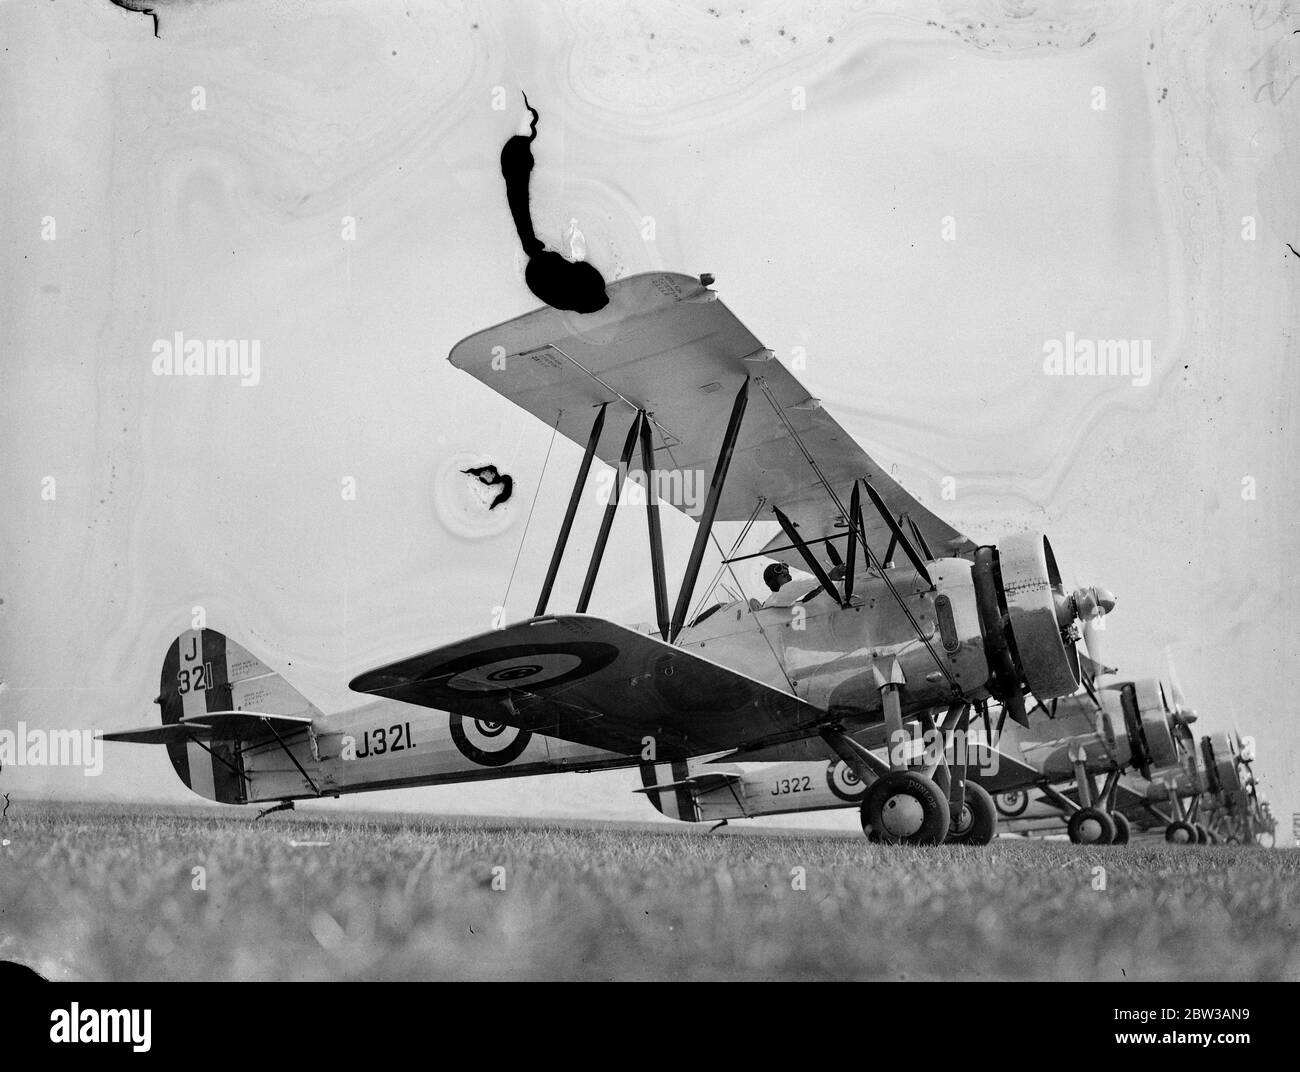 Egyptian air squadron tested at Lympne before formation flight to Egypt . To be used to suppress dope smuggling . A fleet of ten Avro biplanes built in England for the Egyptian Government underwent tests and official inspection at Lympne Aerodrome , Kent , before taking off for a formation flight to Cairo . The planes will be used in Egypt for military purposes and in suppressing the drug traffic . Photo shows the line of planes on the runway at Lympne . 14 September 1934 Stock Photo